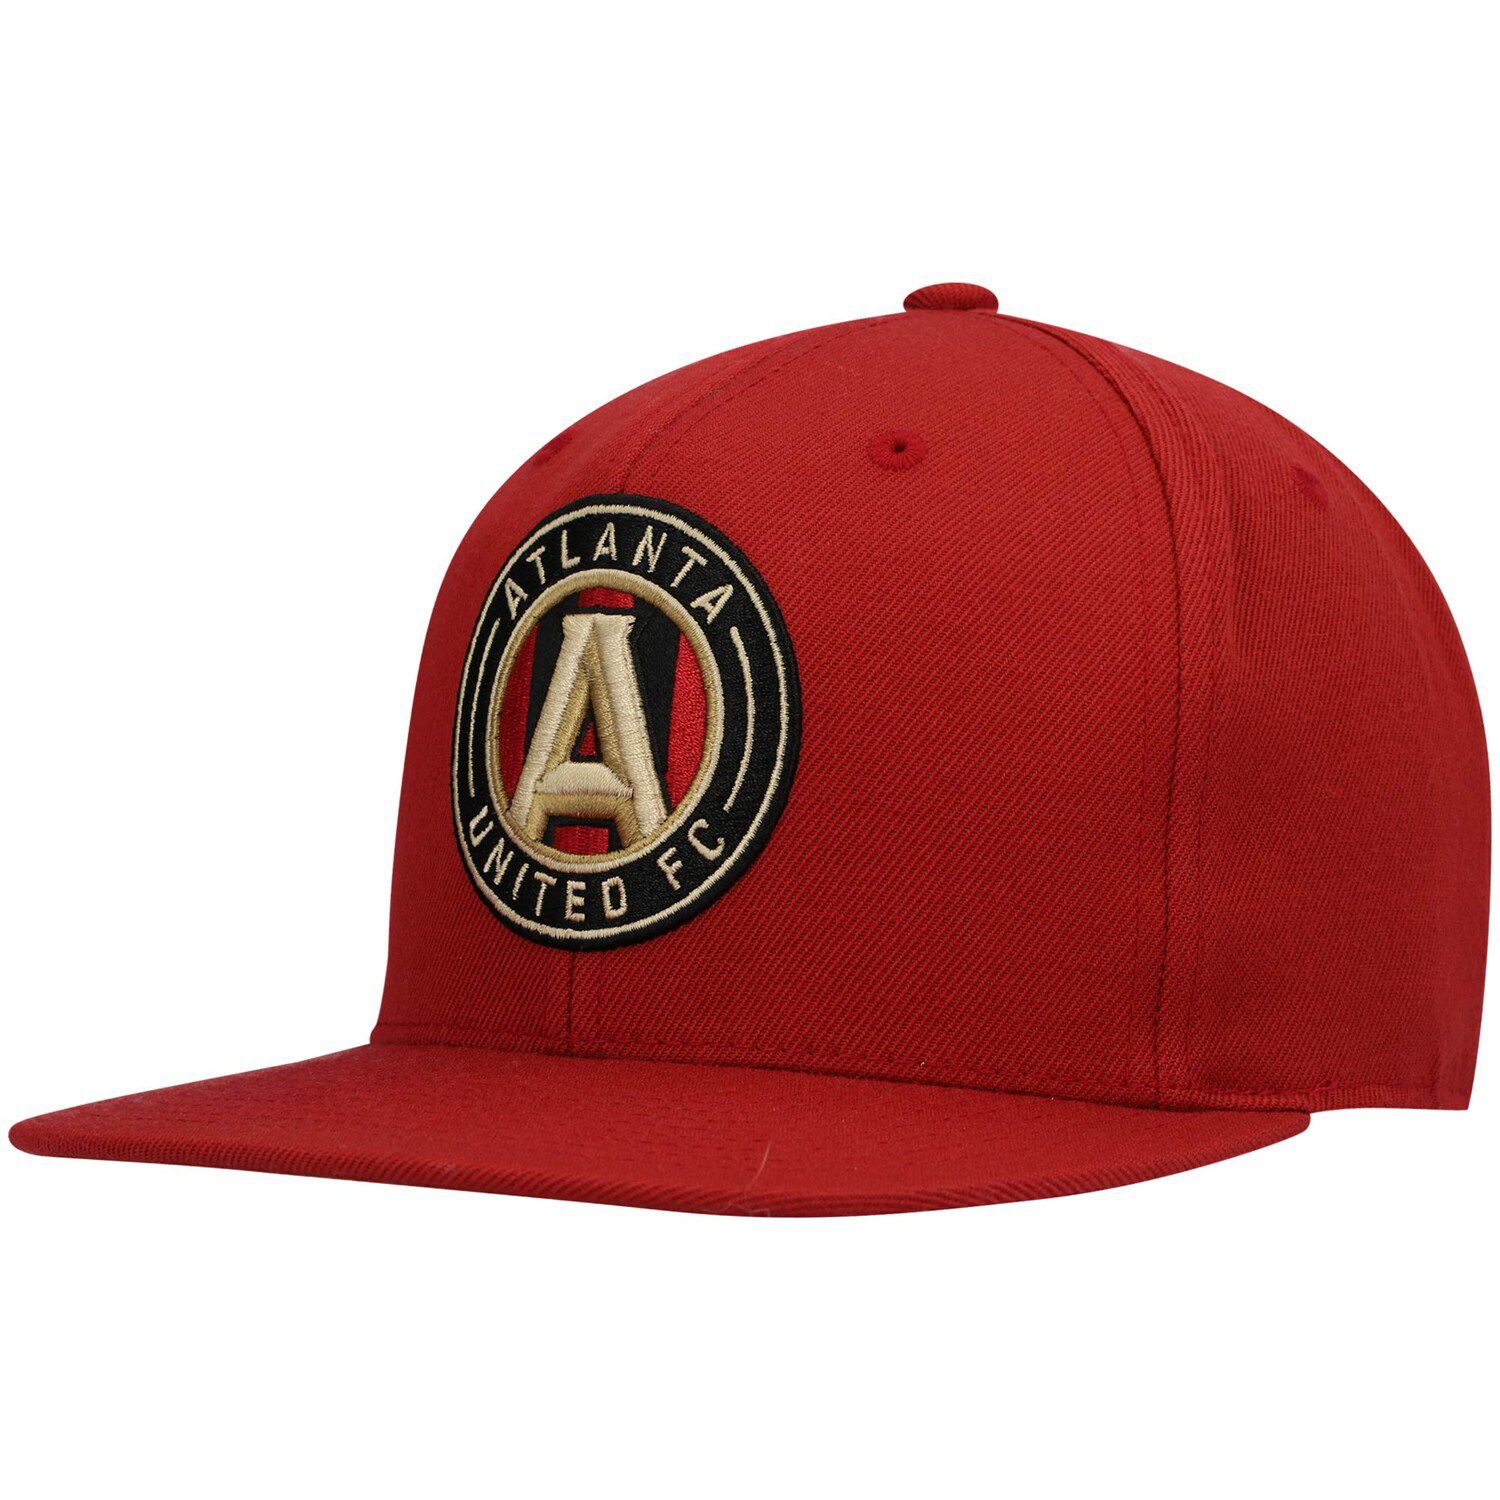 Image for Unbranded Men's Mitchell & Ness Red Atlanta United FC Team Solid Fitted Hat at Kohl's.